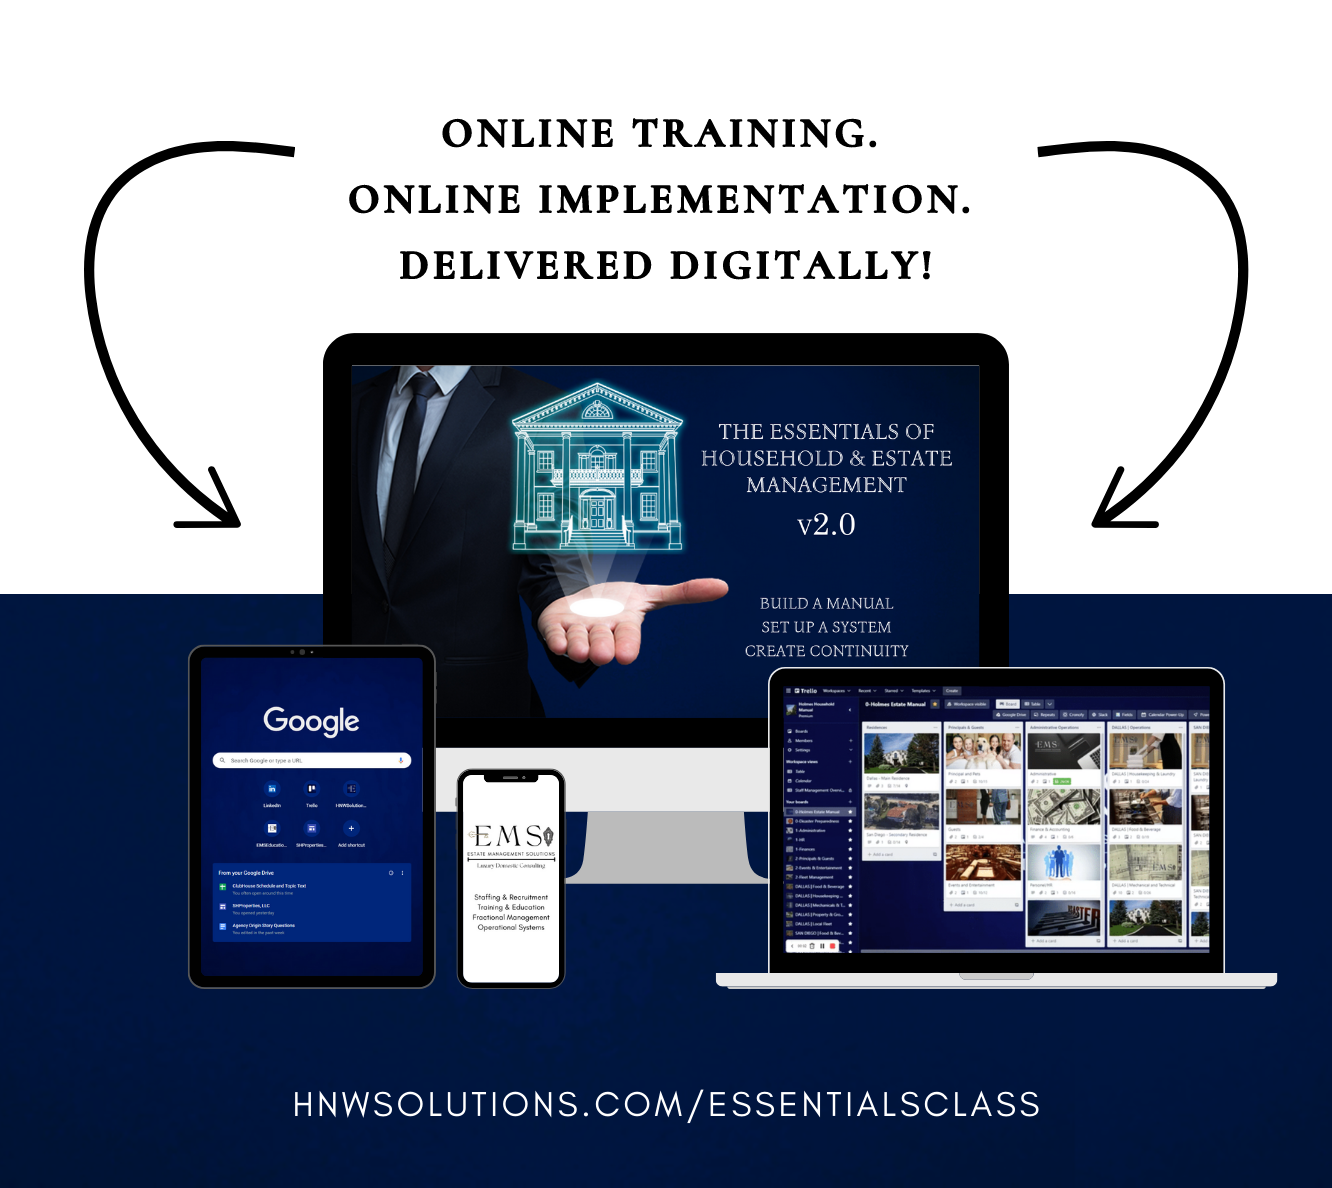 Promotional graphic showcasing online training and implementation for household and estate management, featuring digital devices displaying the content and the website for enrollment.